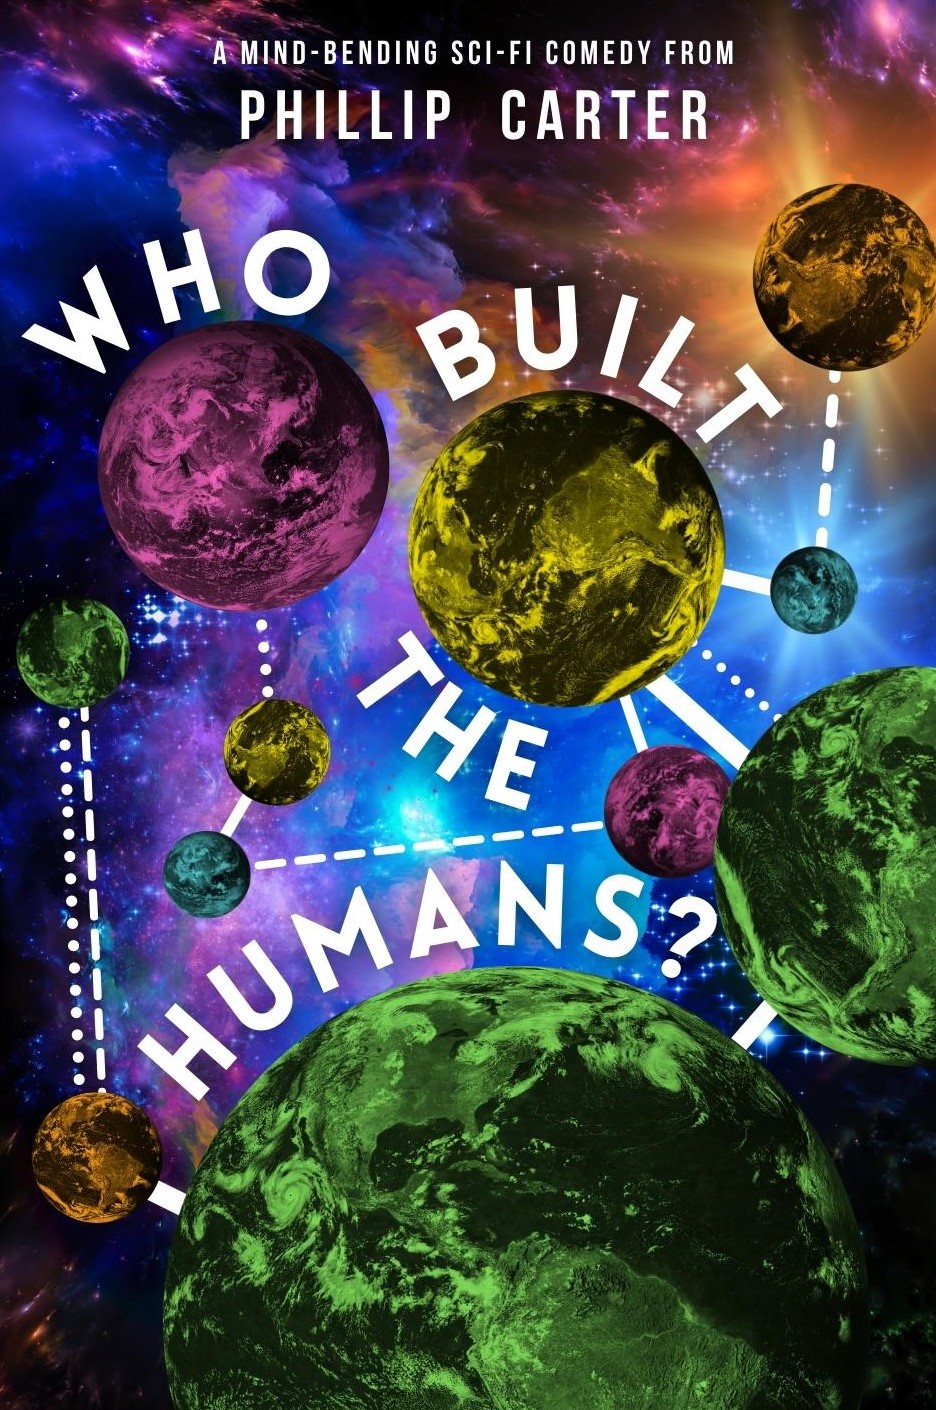 Cover of Phillip Carter's science fiction novel Who Built the Humans?